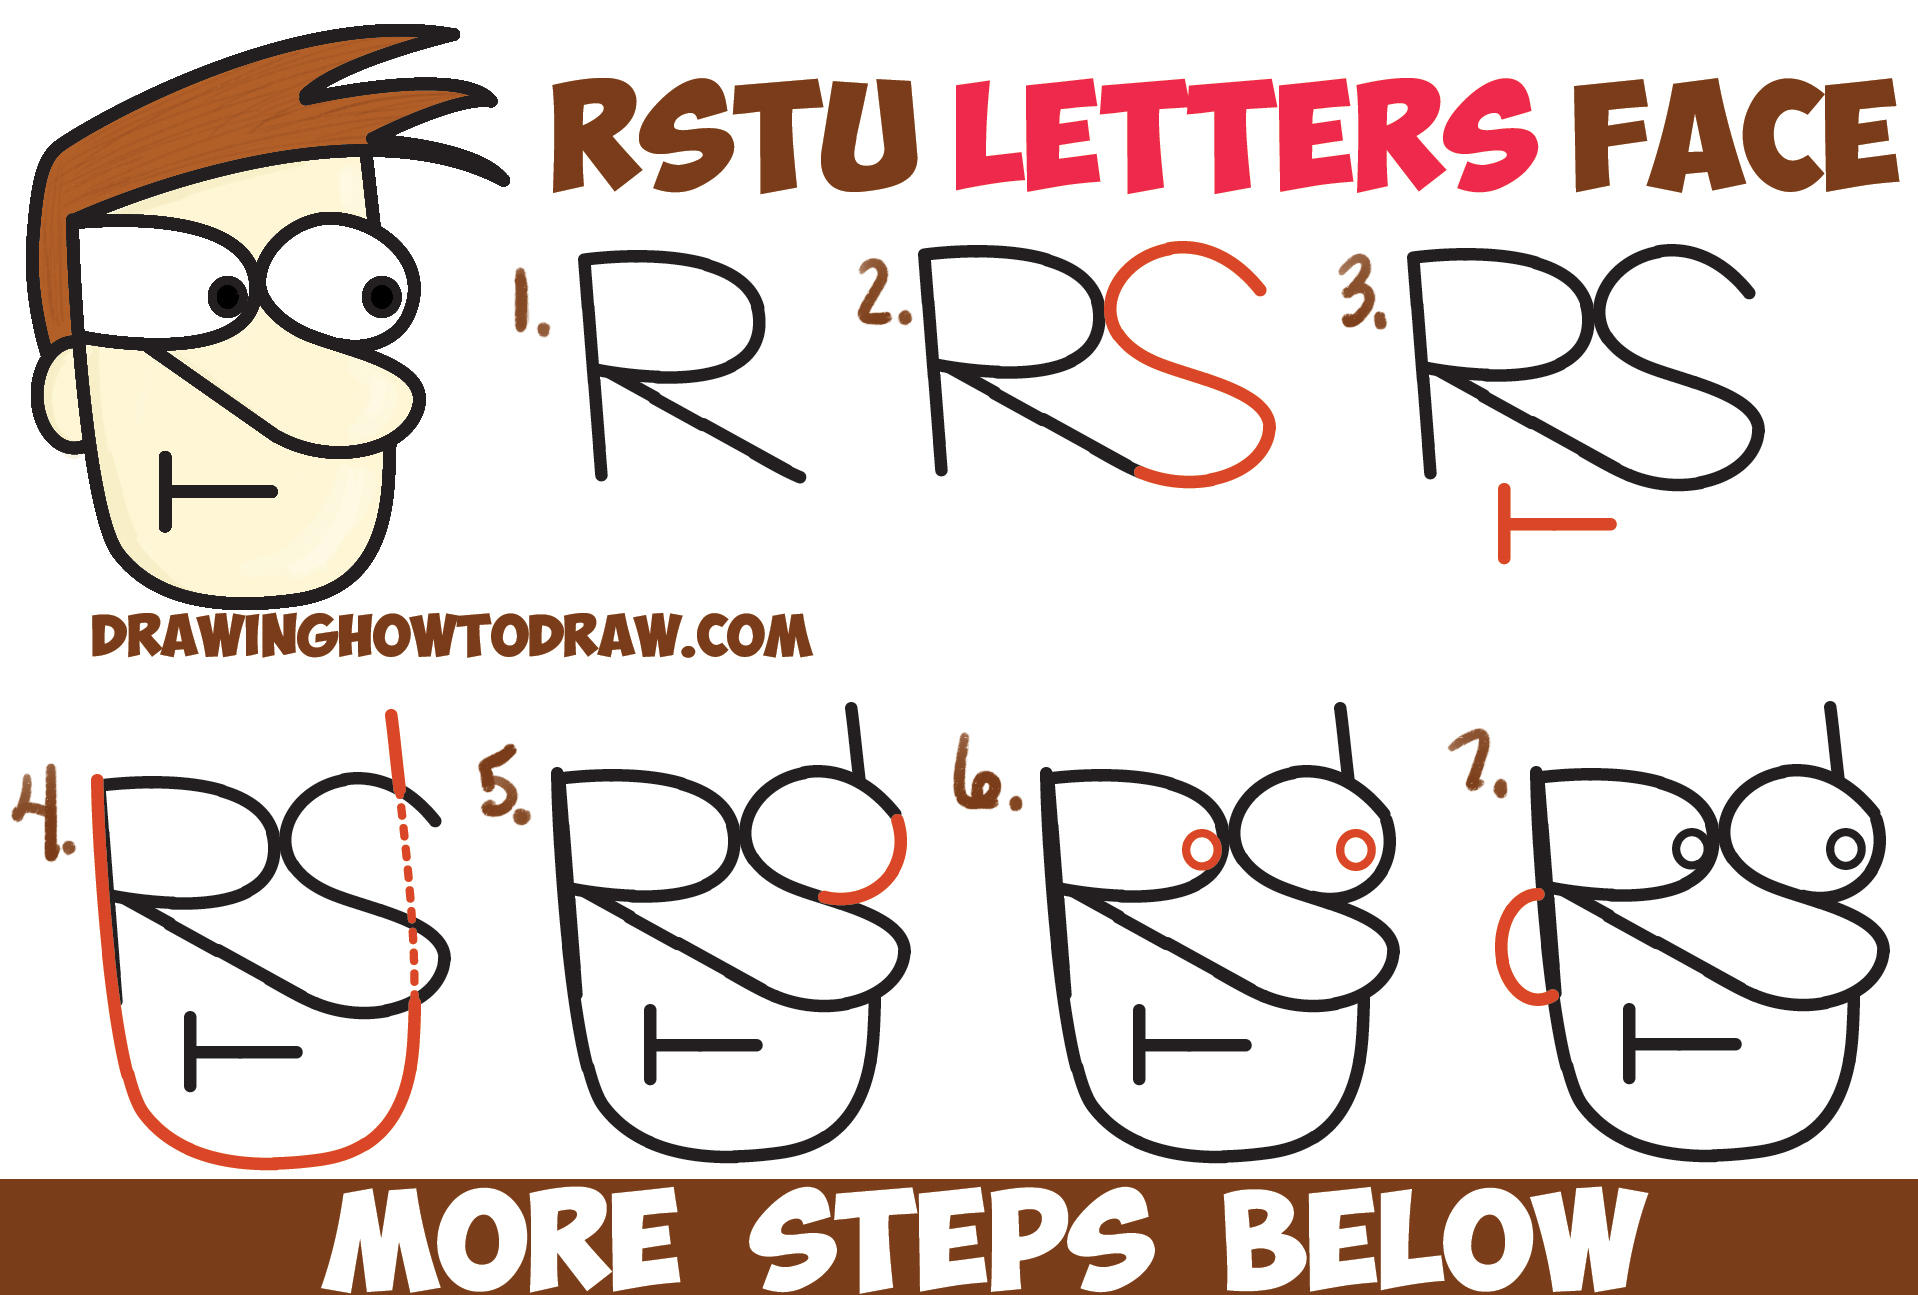 How to Draw a Cartoon Face with Alphabet Letters R, S, T, and U Easy Step by Step Drawing Tutorial for Kids